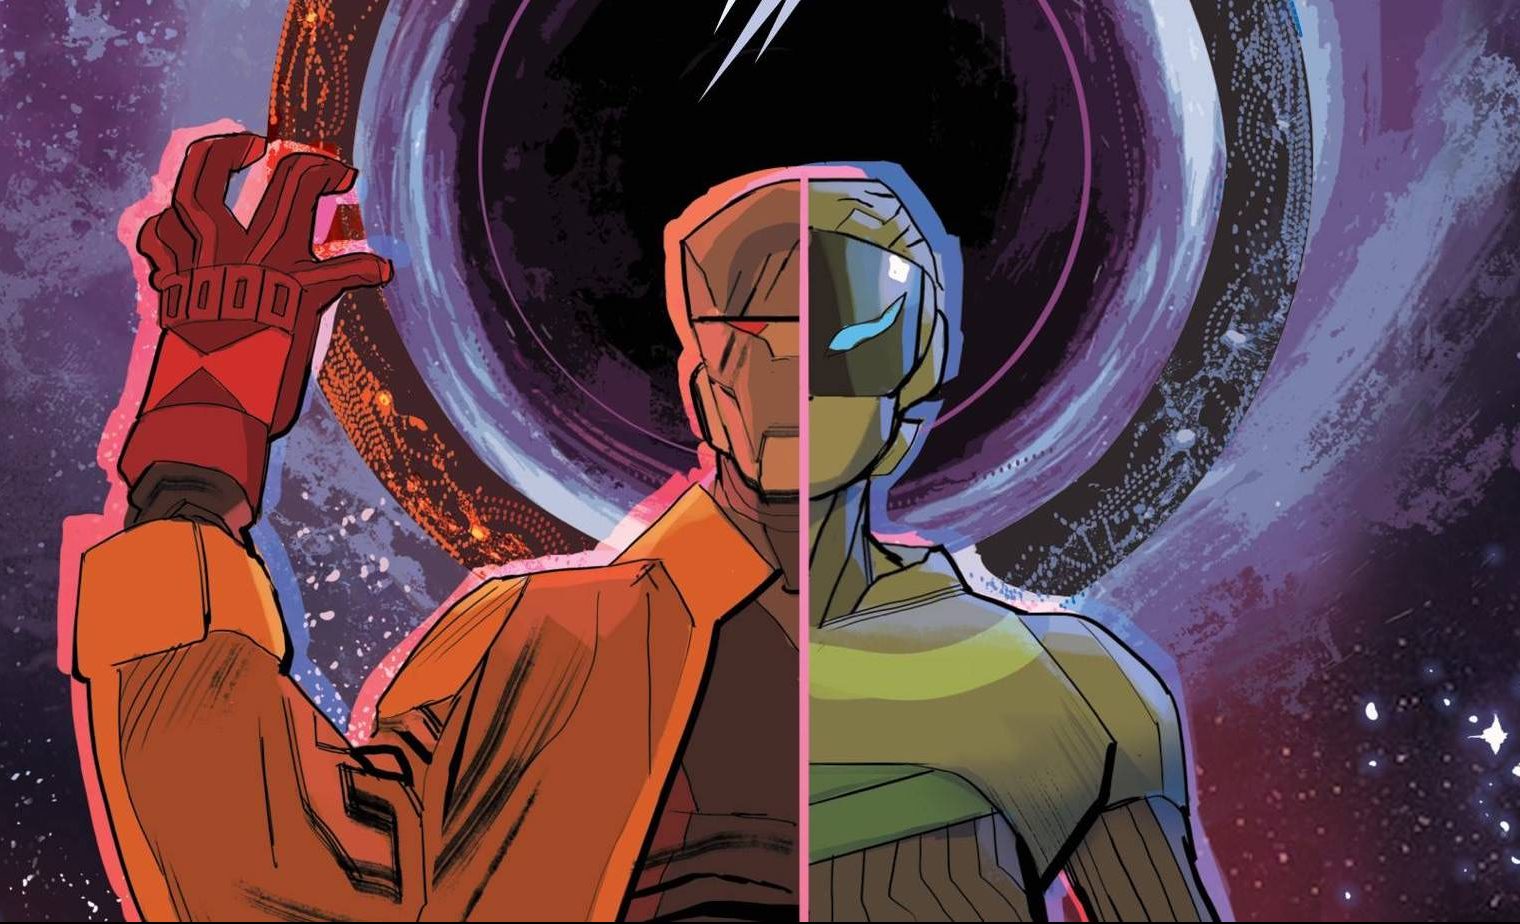 'Void Rivals' #1 is more than meets the eye